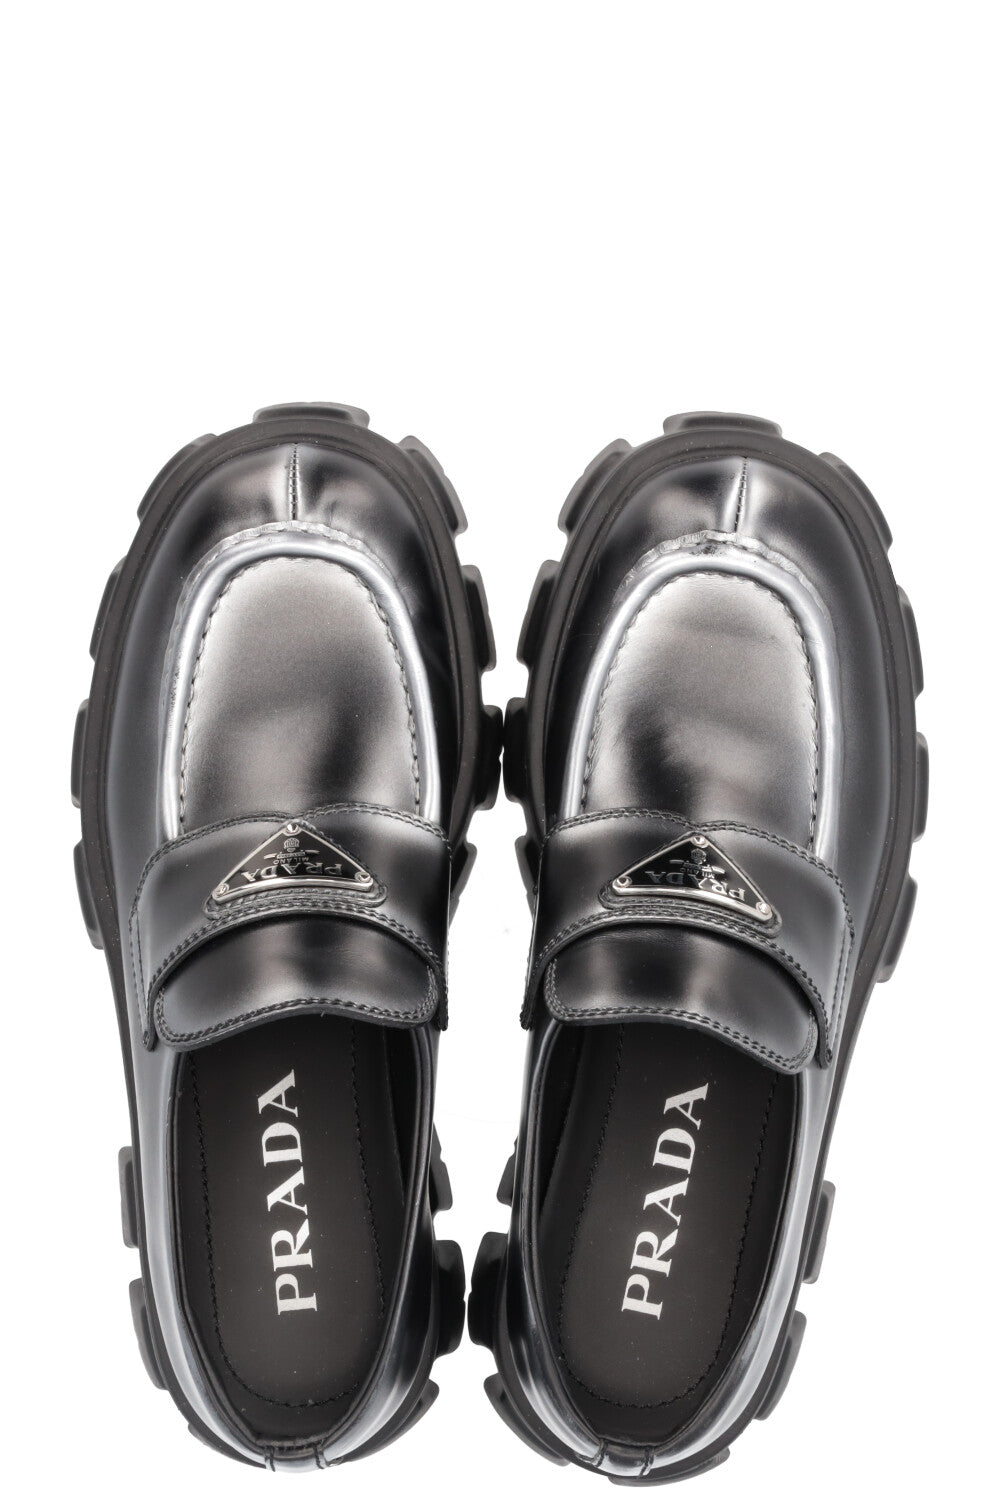 PRADA Monolith Loafers Black and Silver